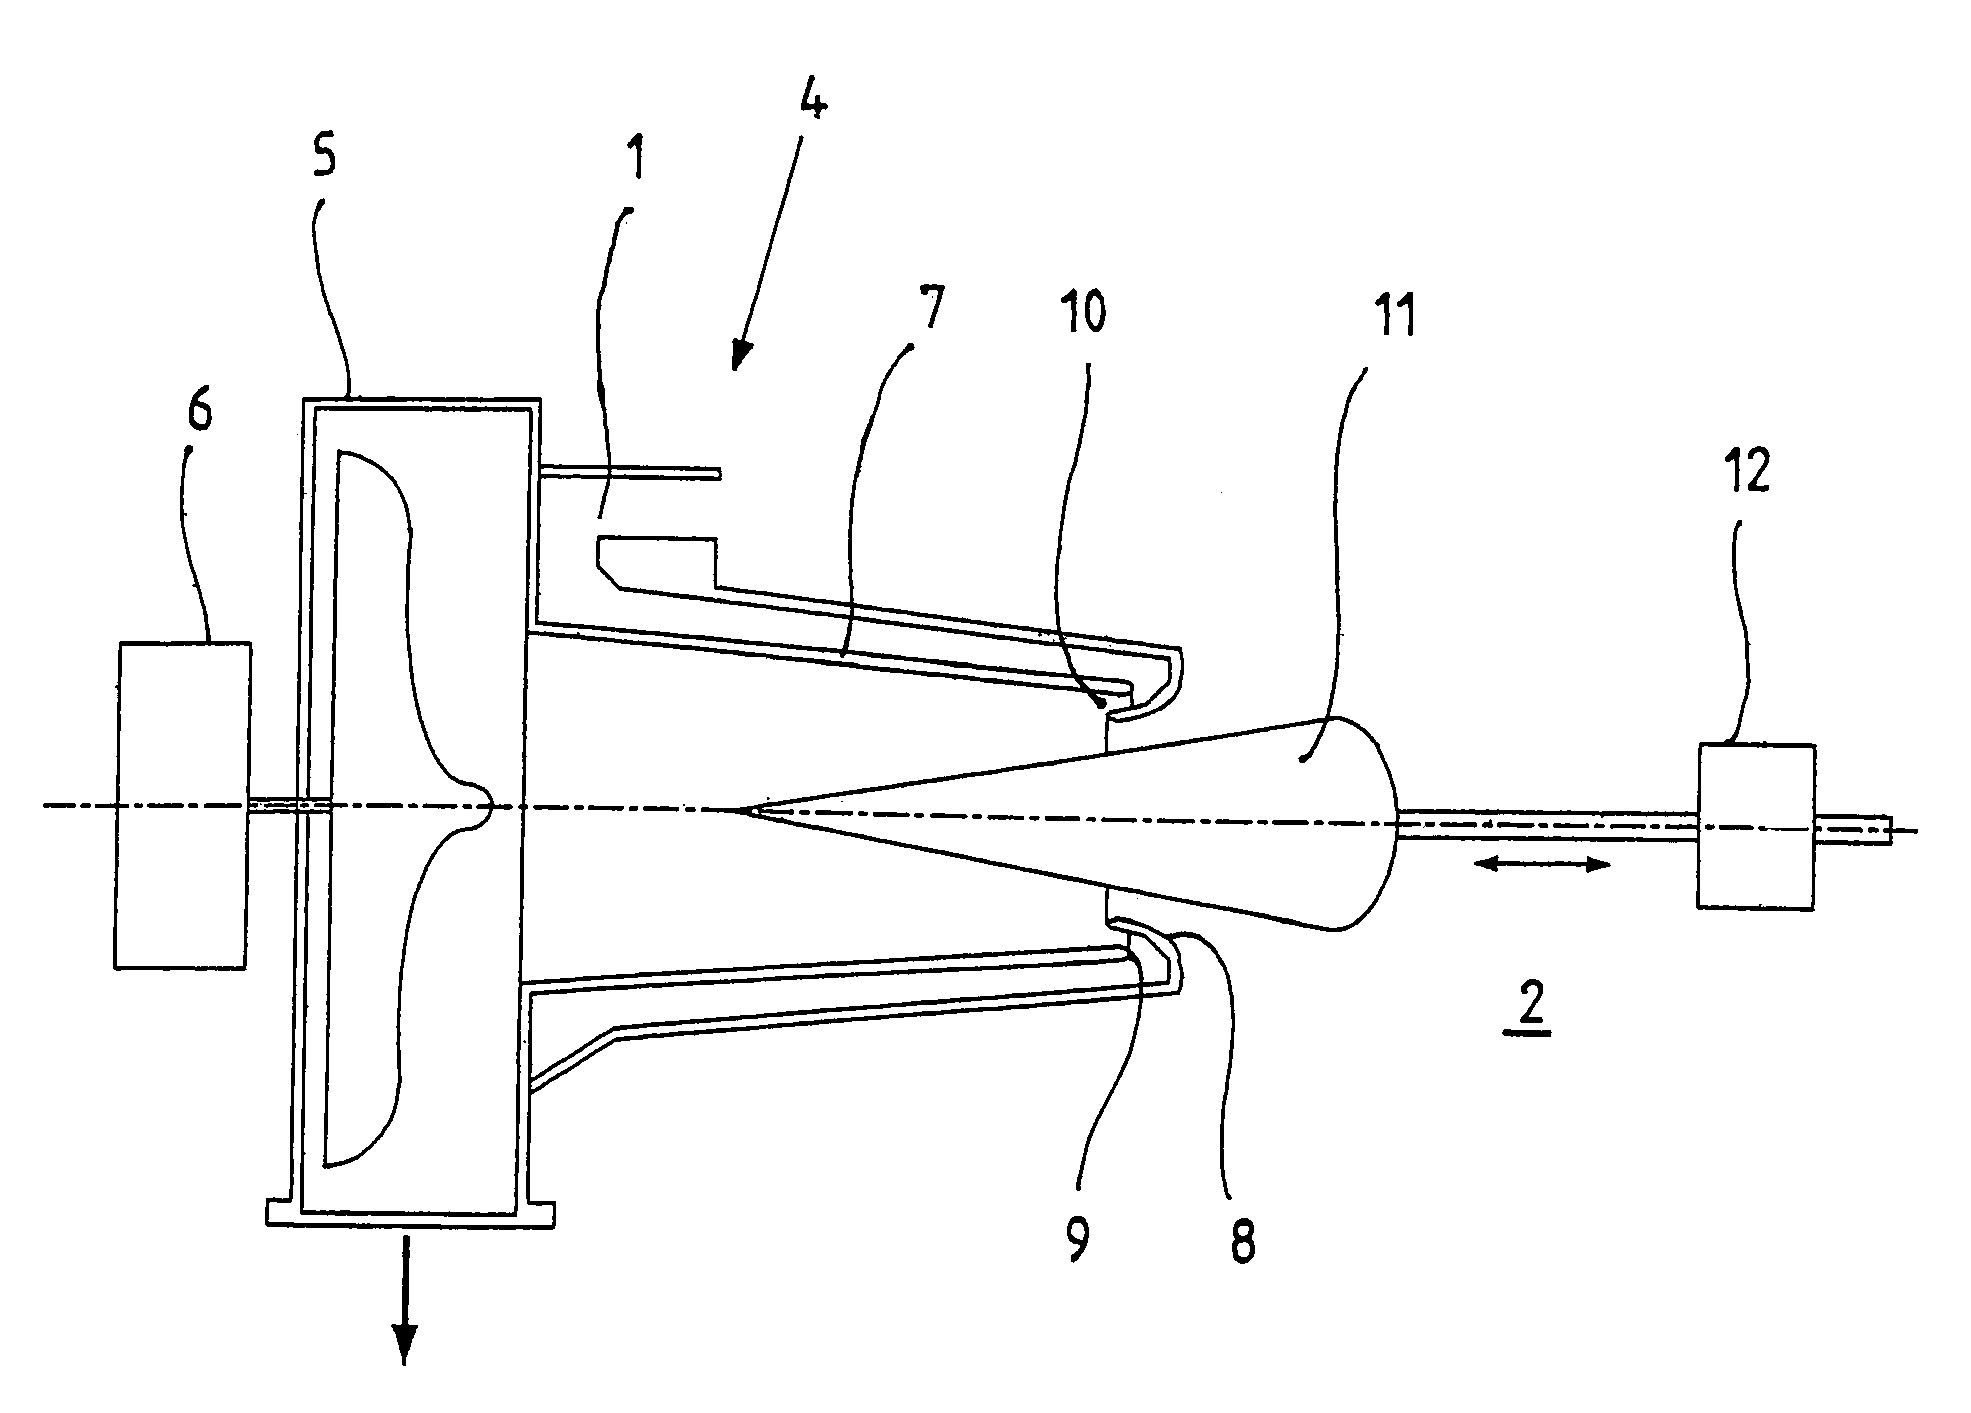 Apparatus for regulating the gas/air ration for a pre-mixing combustion device